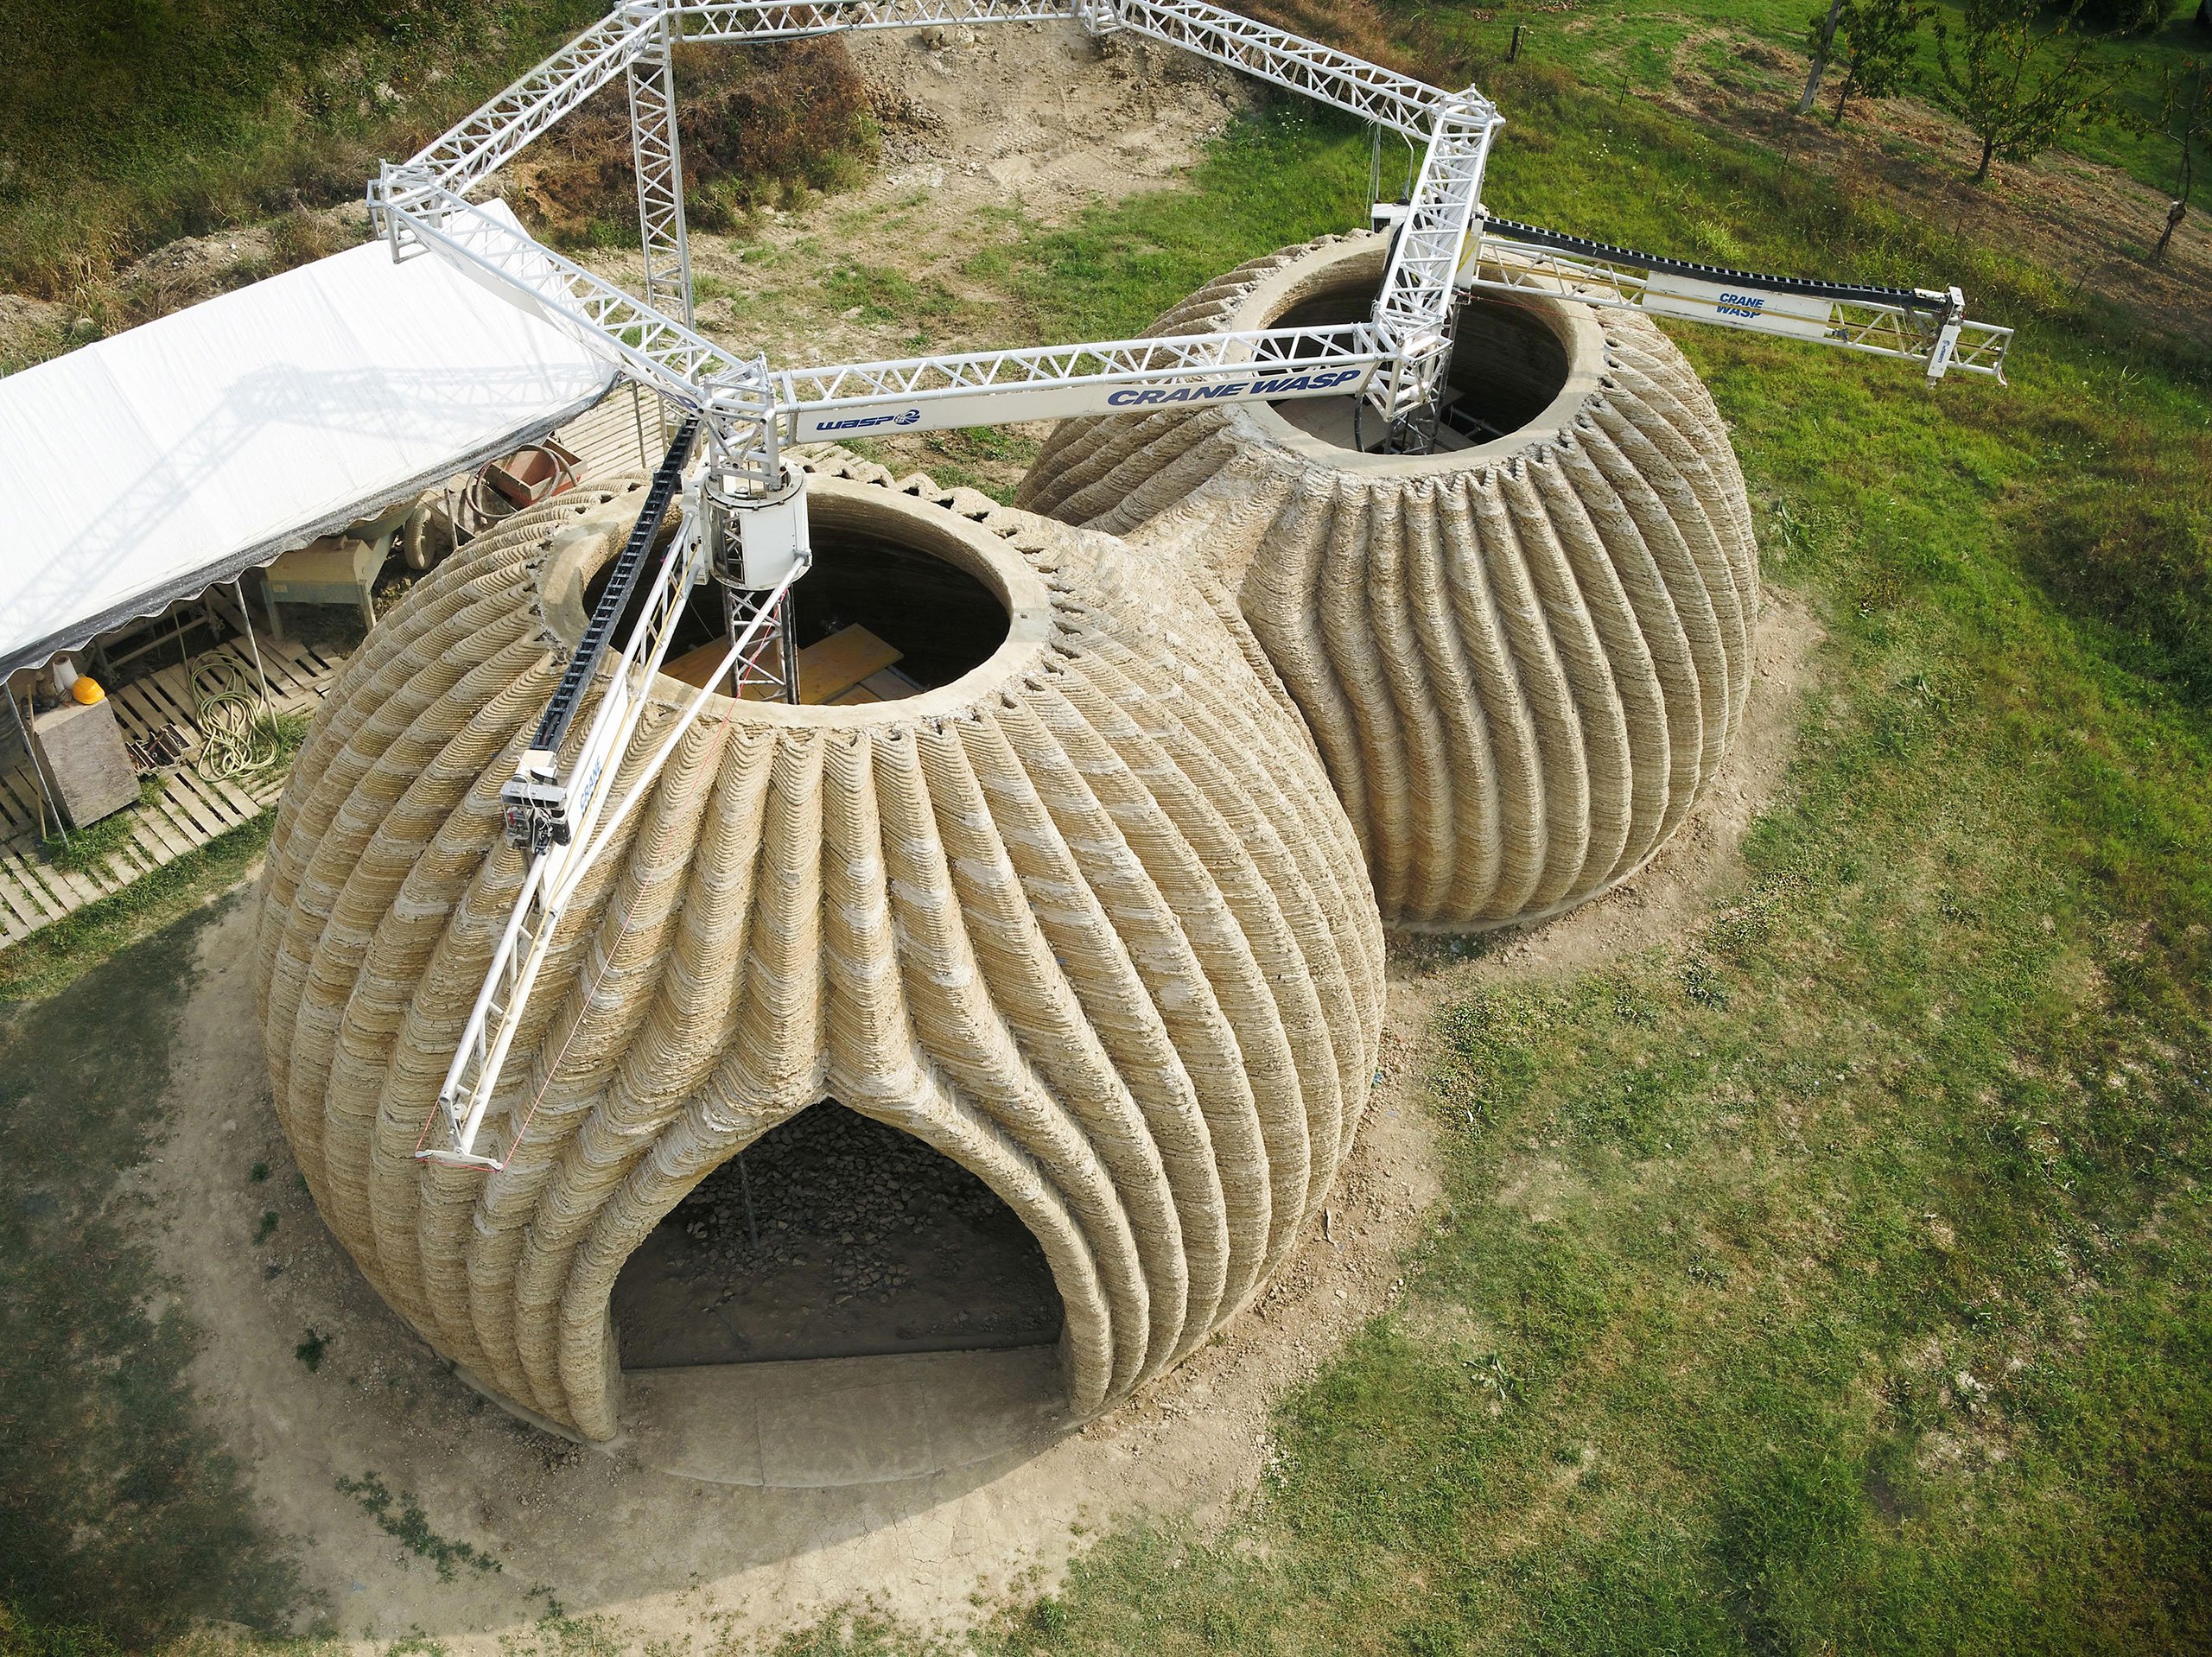 TECLA, 3D Printed Habitat by WASP and Mario Cucinella Architects © WASP